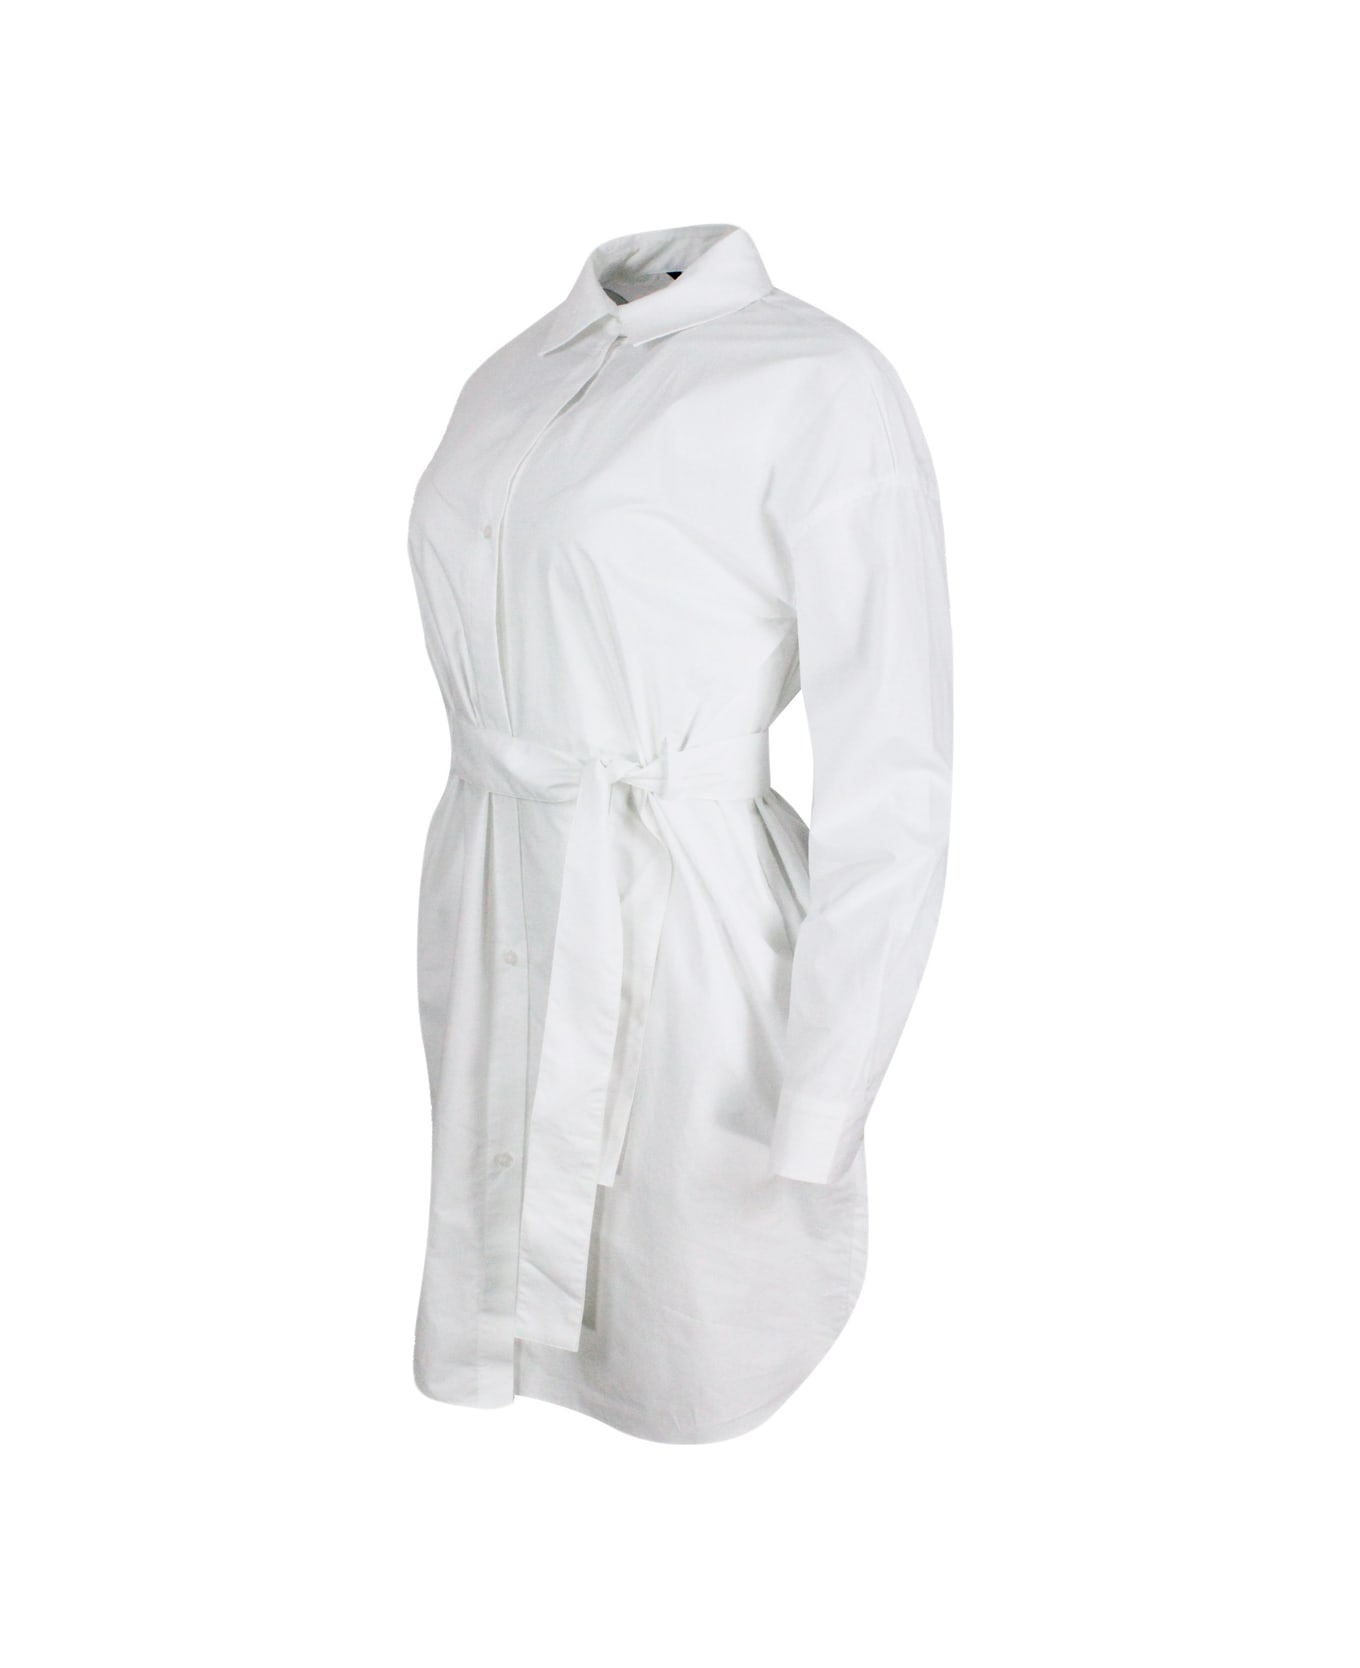 Armani Collezioni Dress Made Of Soft Cotton With Long Sleeves, With Button Closure On The Front And Belt. - White ワンピース＆ドレス